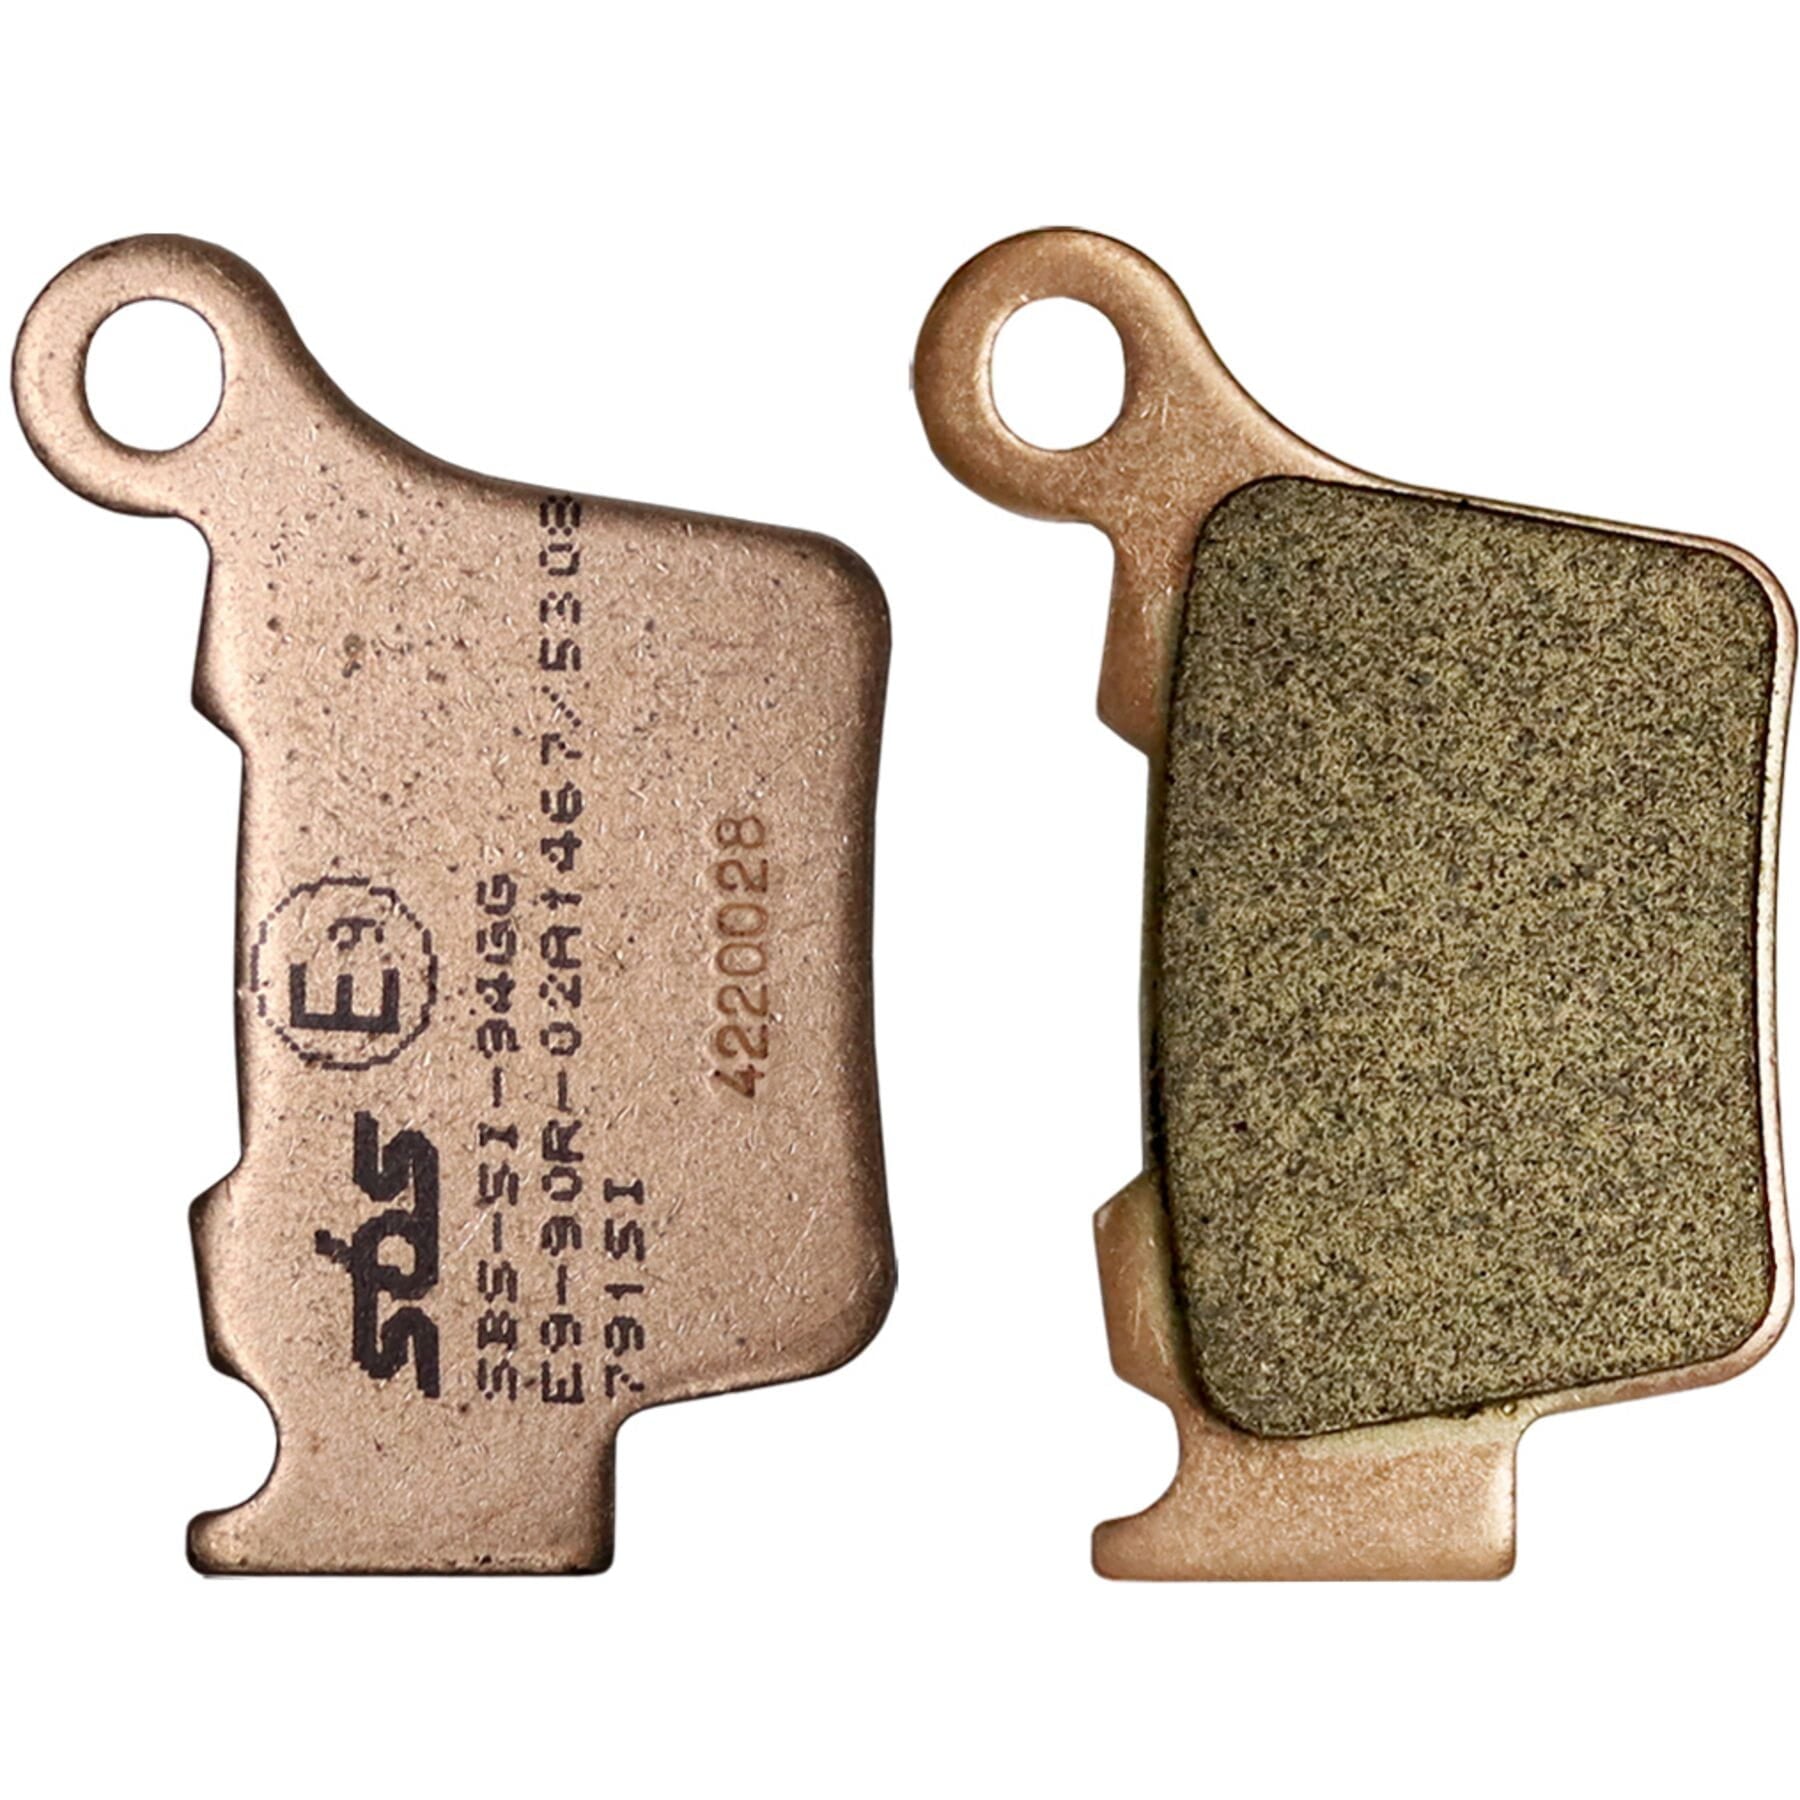 790 Sintered Brake Pads for motorcycles, showing top and side views with packaging